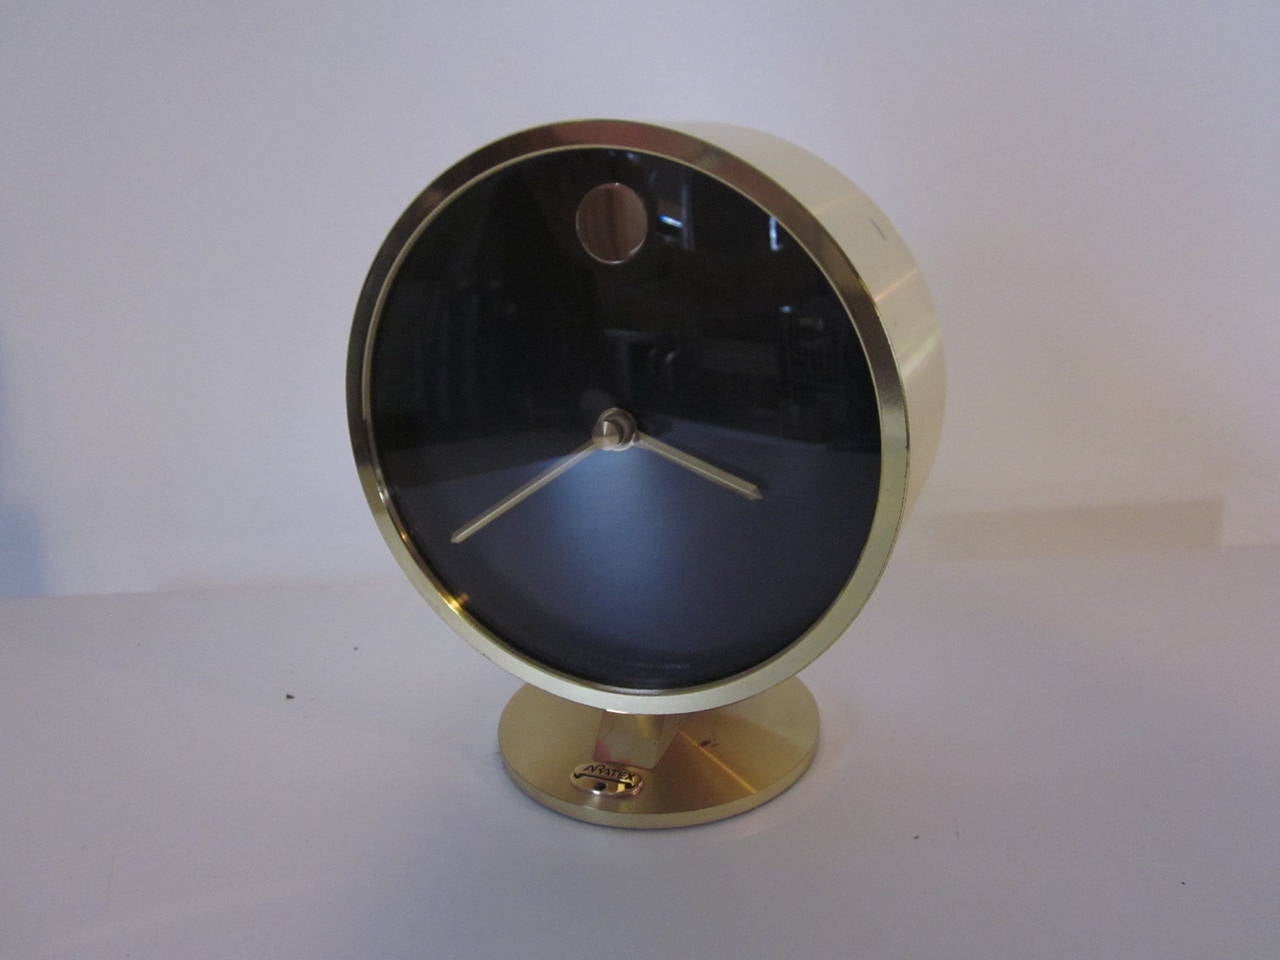 A Howard Miller table clock in a satin brushed brass finish with black face and 12 o'clock positioned brass dot and hands. It has a glass covered face, pedestal base with small logo from a company used as a presentation piece. Pull off back revels